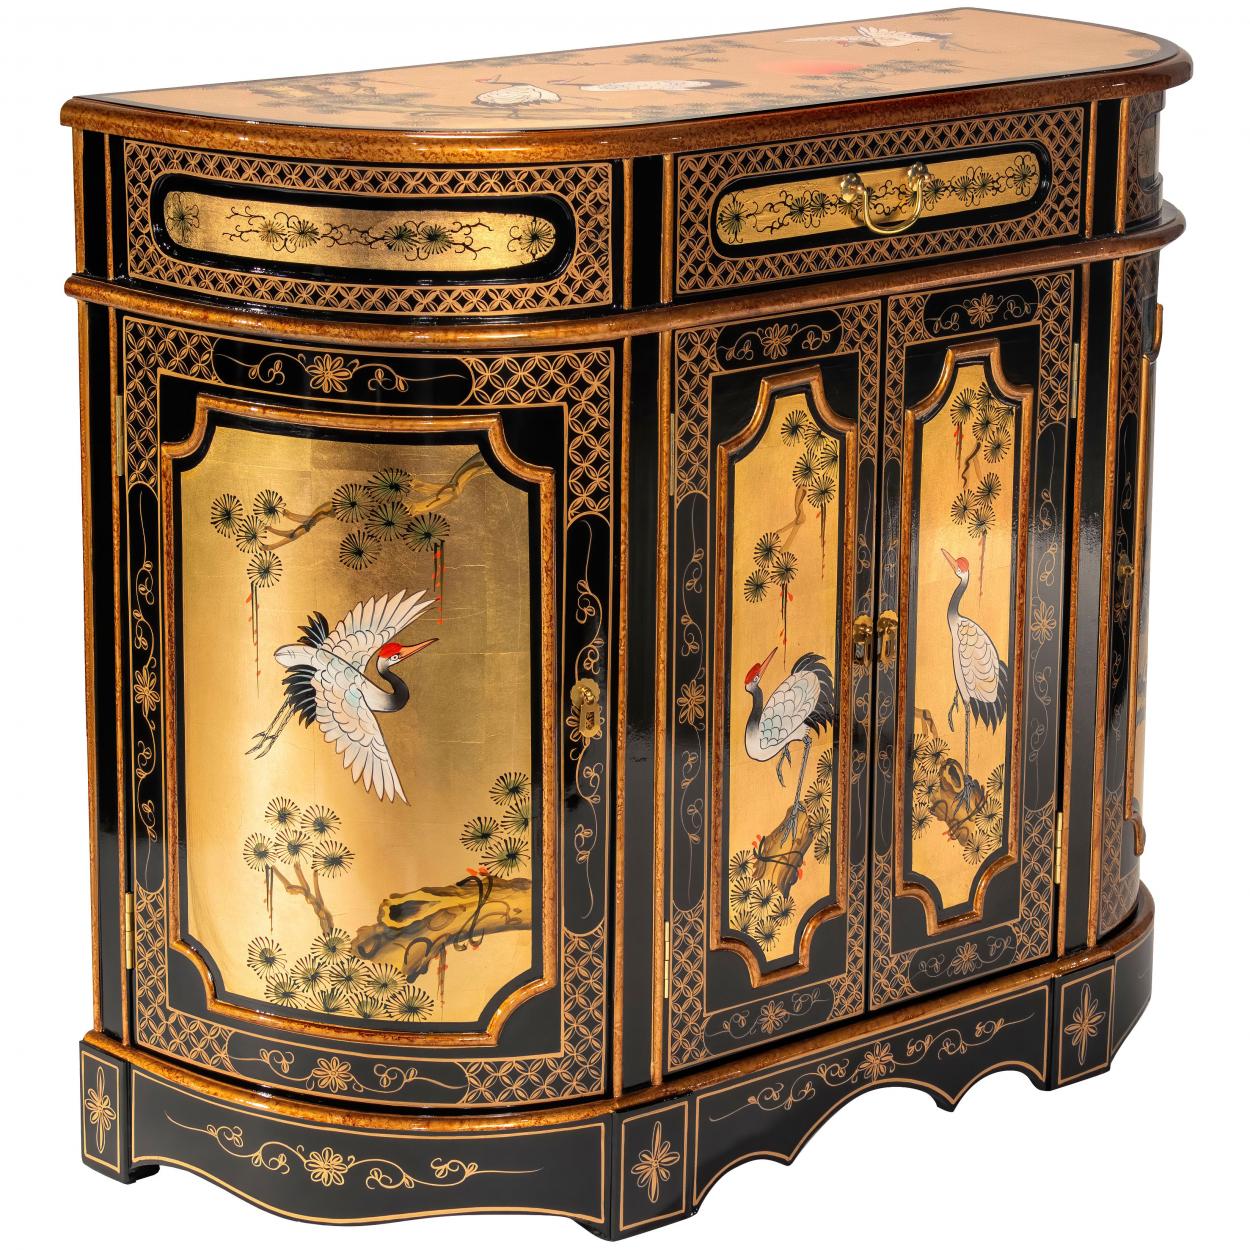 Buy Gold Lacquer Cabinet - Cranes Online (L3-MF-8353G